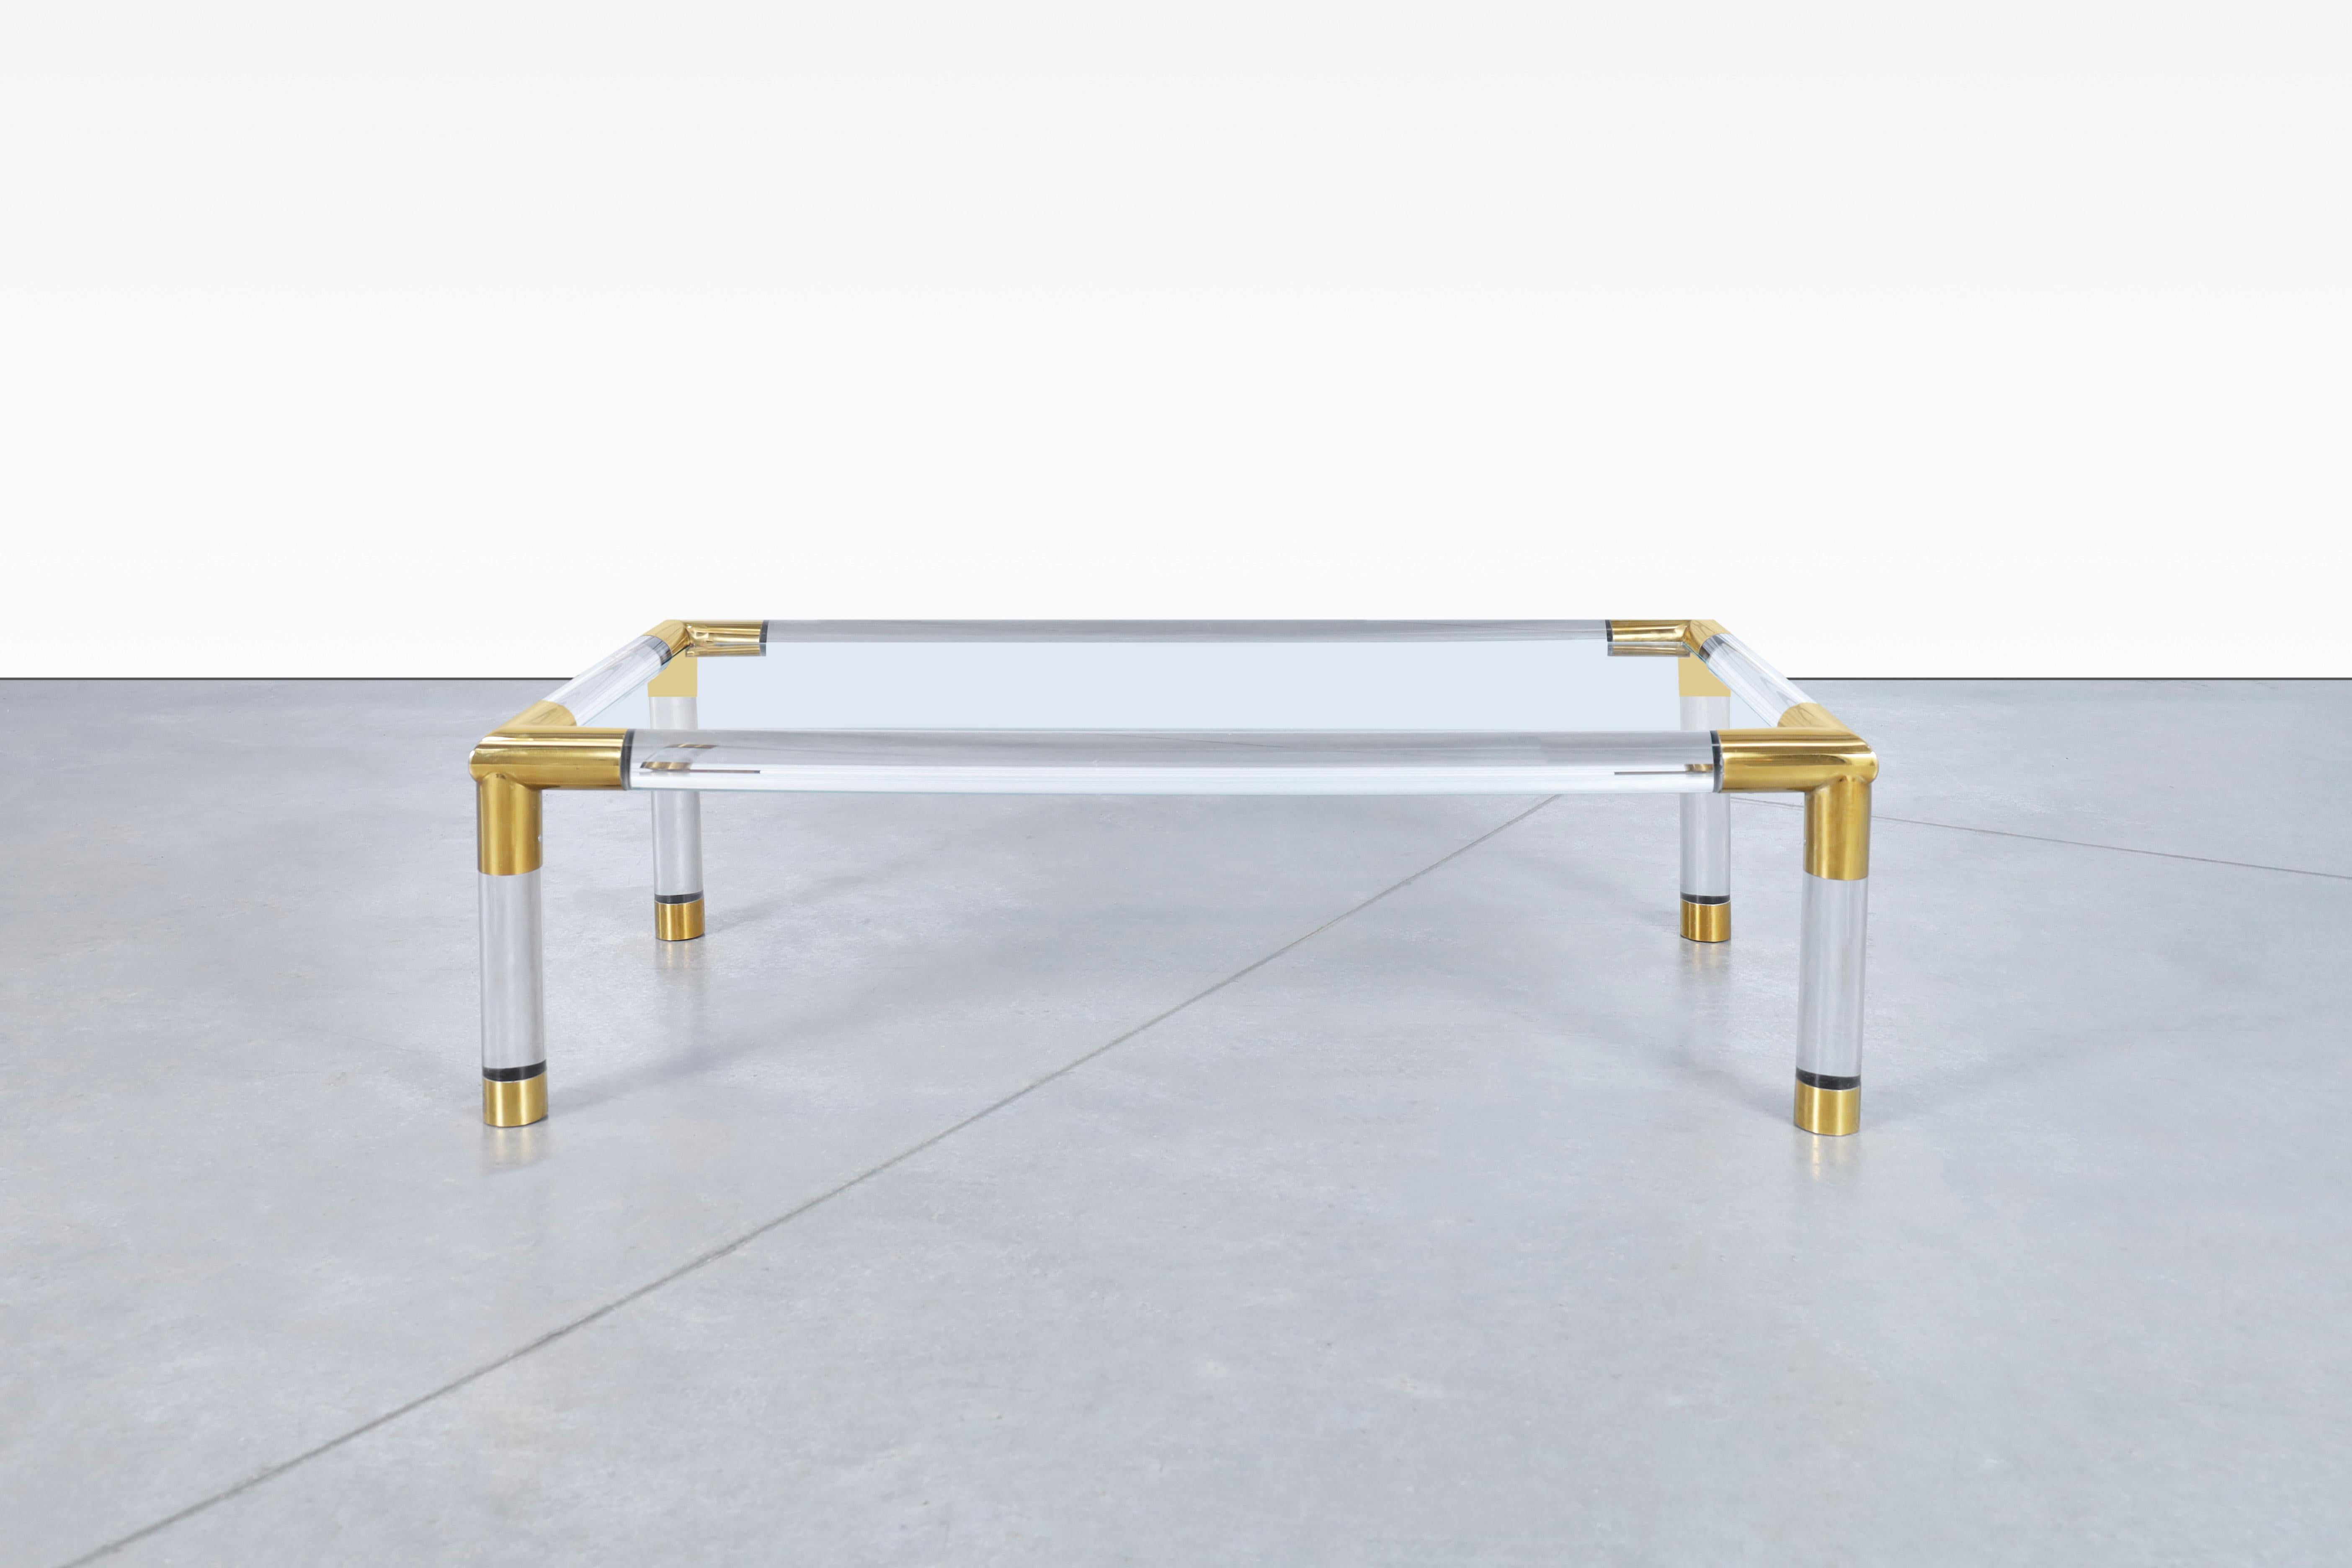 Exceptional vintage Italian modernist brass and lucite coffee table designed and manufactured in Italy, circa 1970s. This exquisite table is a true masterpiece of Italian craftsmanship. It features a solid structure made of lucite tubes and polished